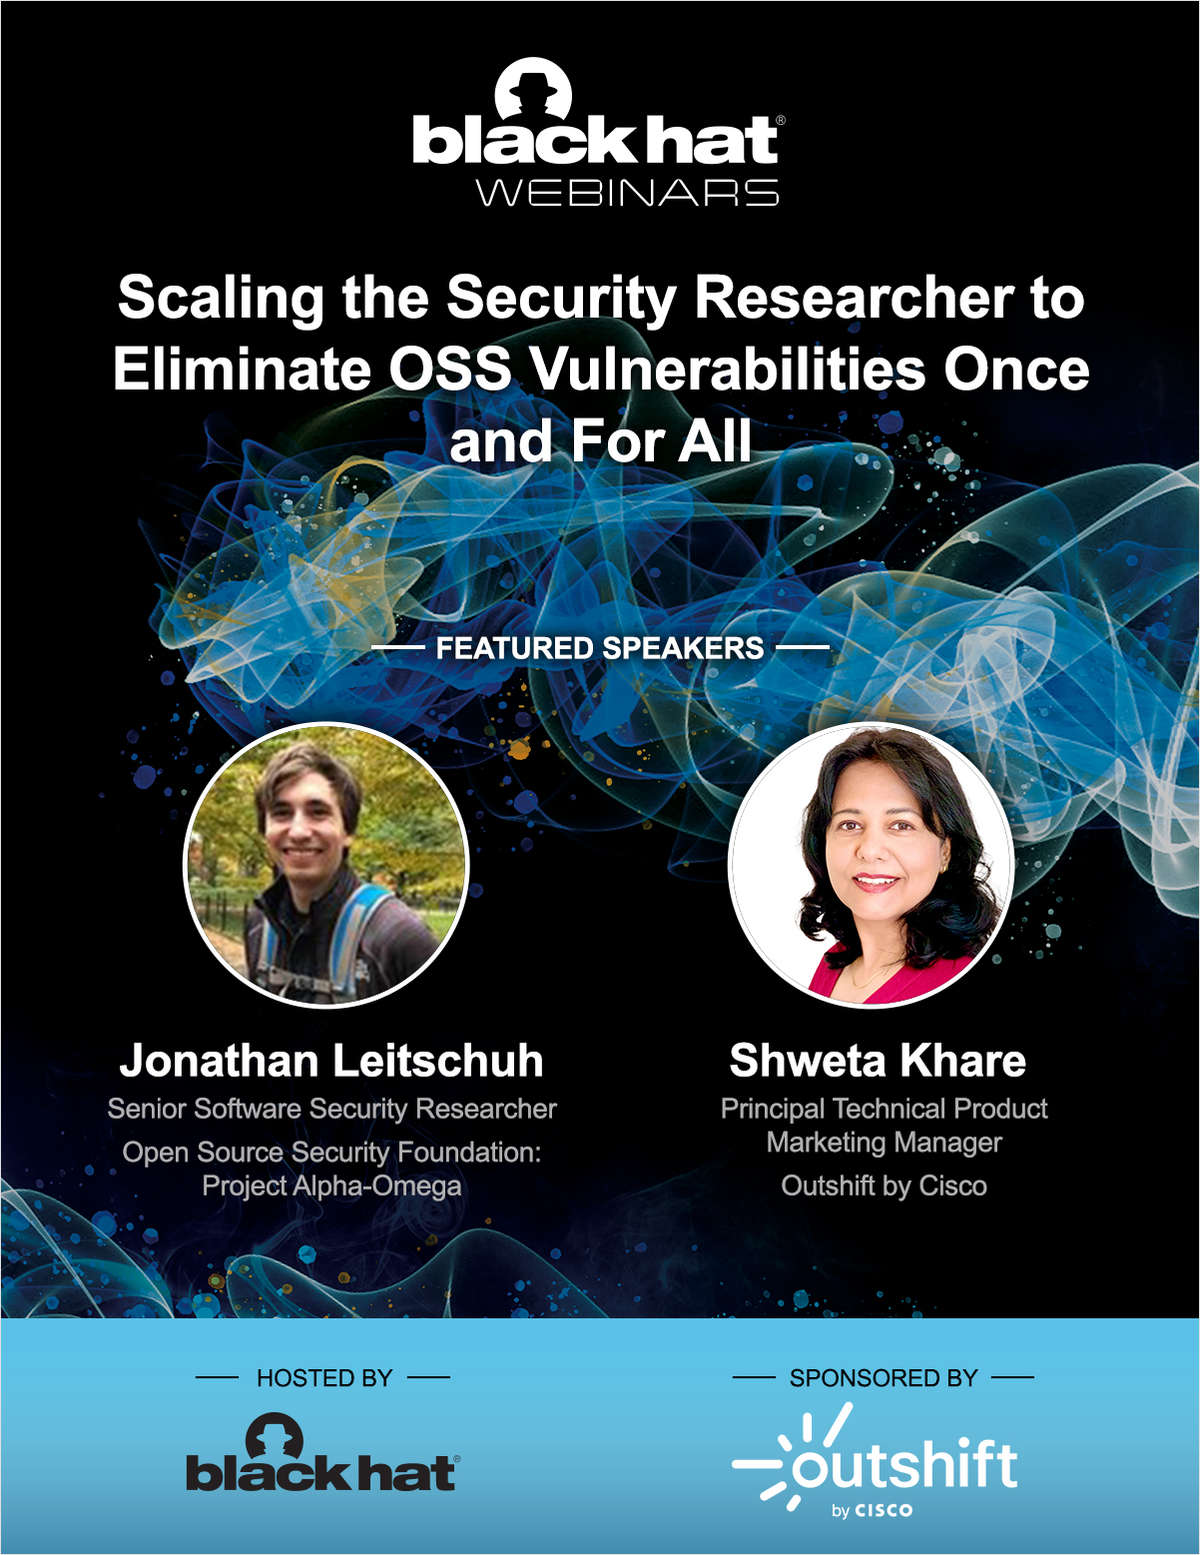 Scaling the Security Researcher to Eliminate OSS Vulnerabilities Once and For All